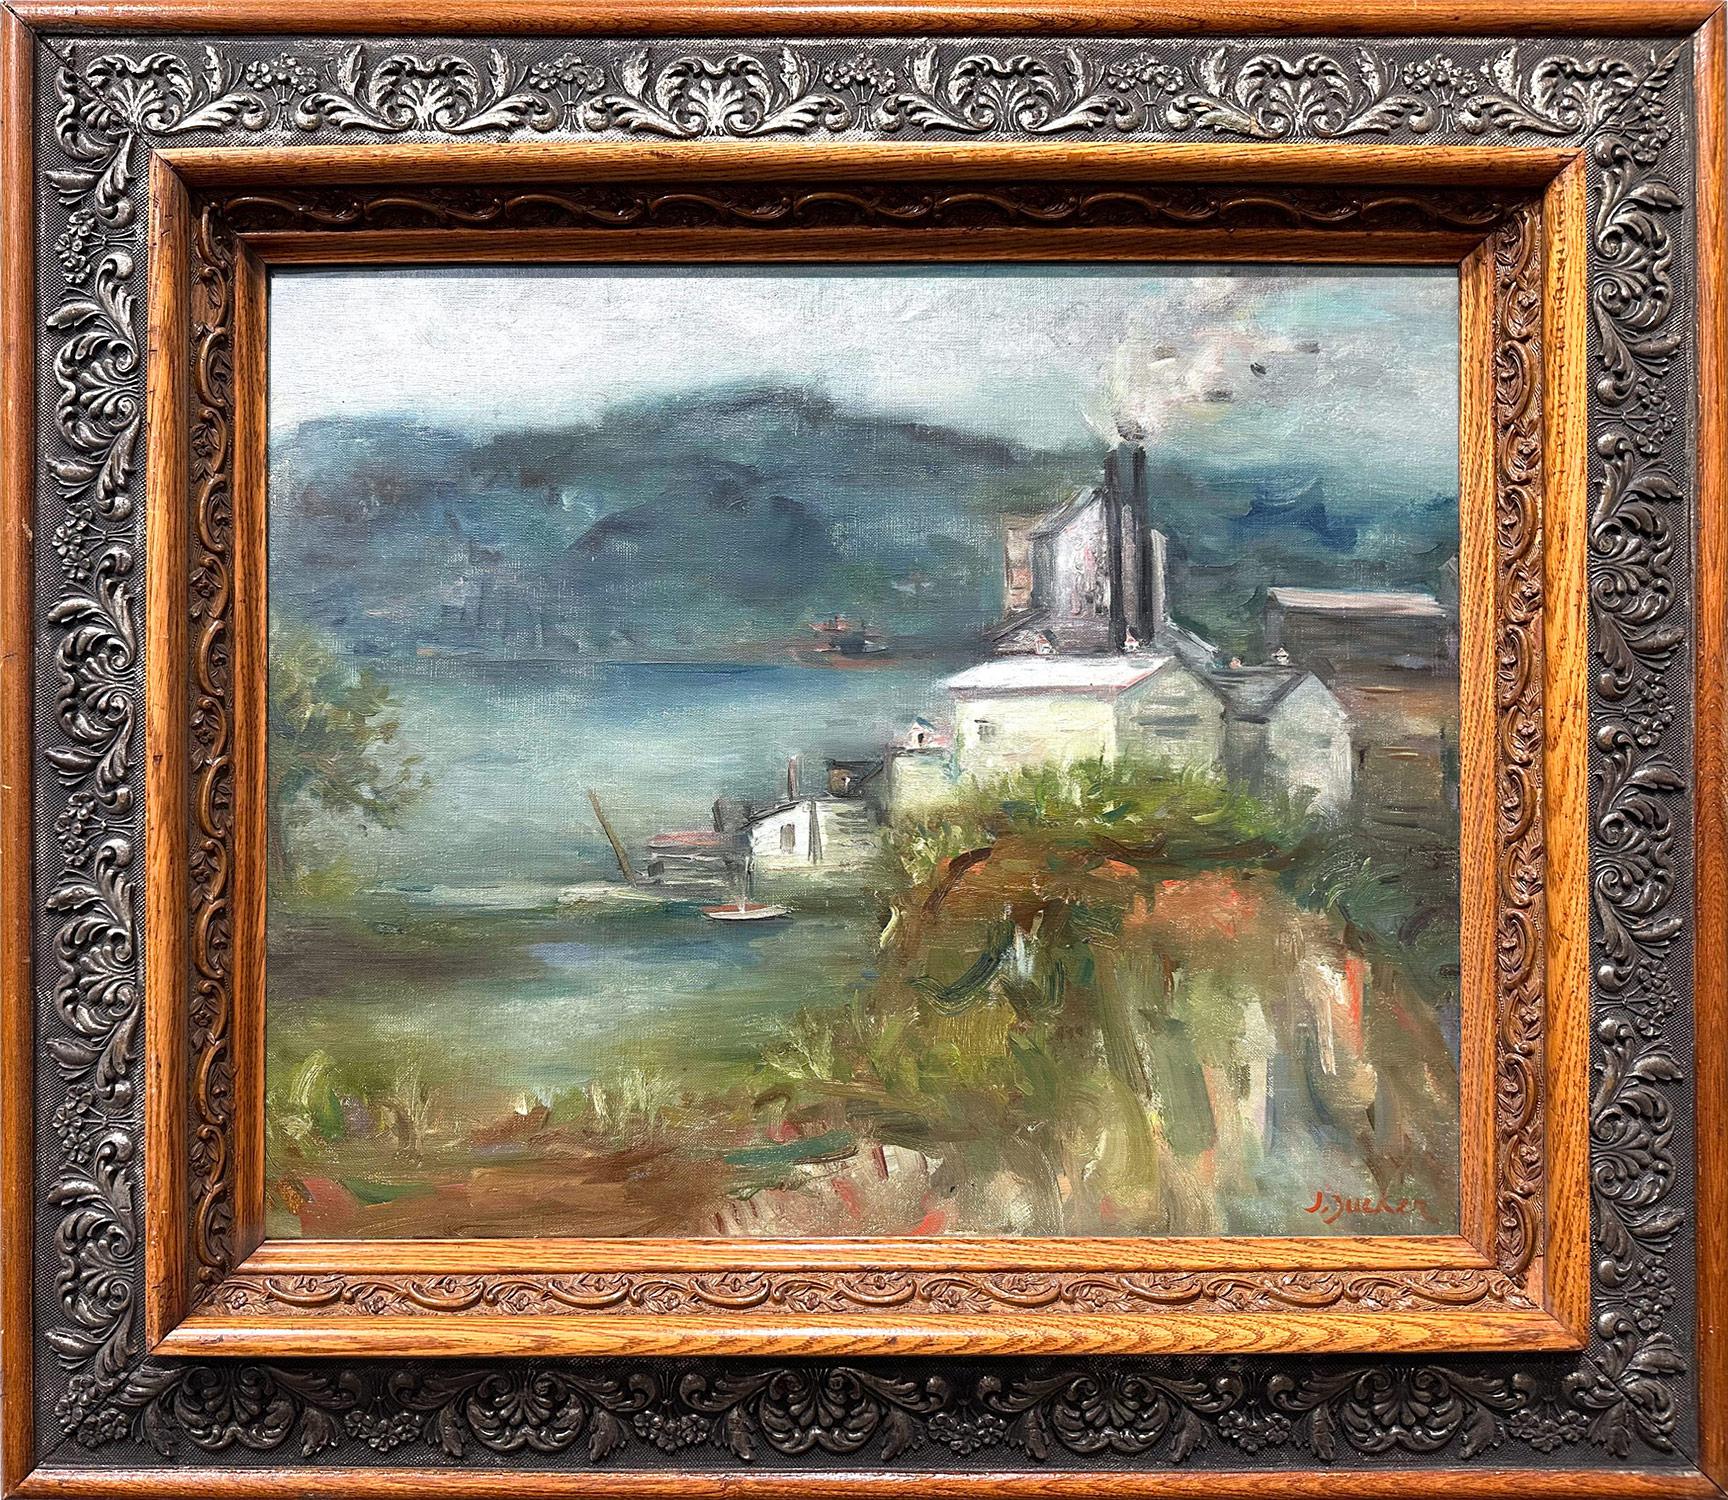 Jacques Zucker Landscape Painting - "Harbor View" Post-Impressionist Landscape Scene Oil Painting on Canvas Framed